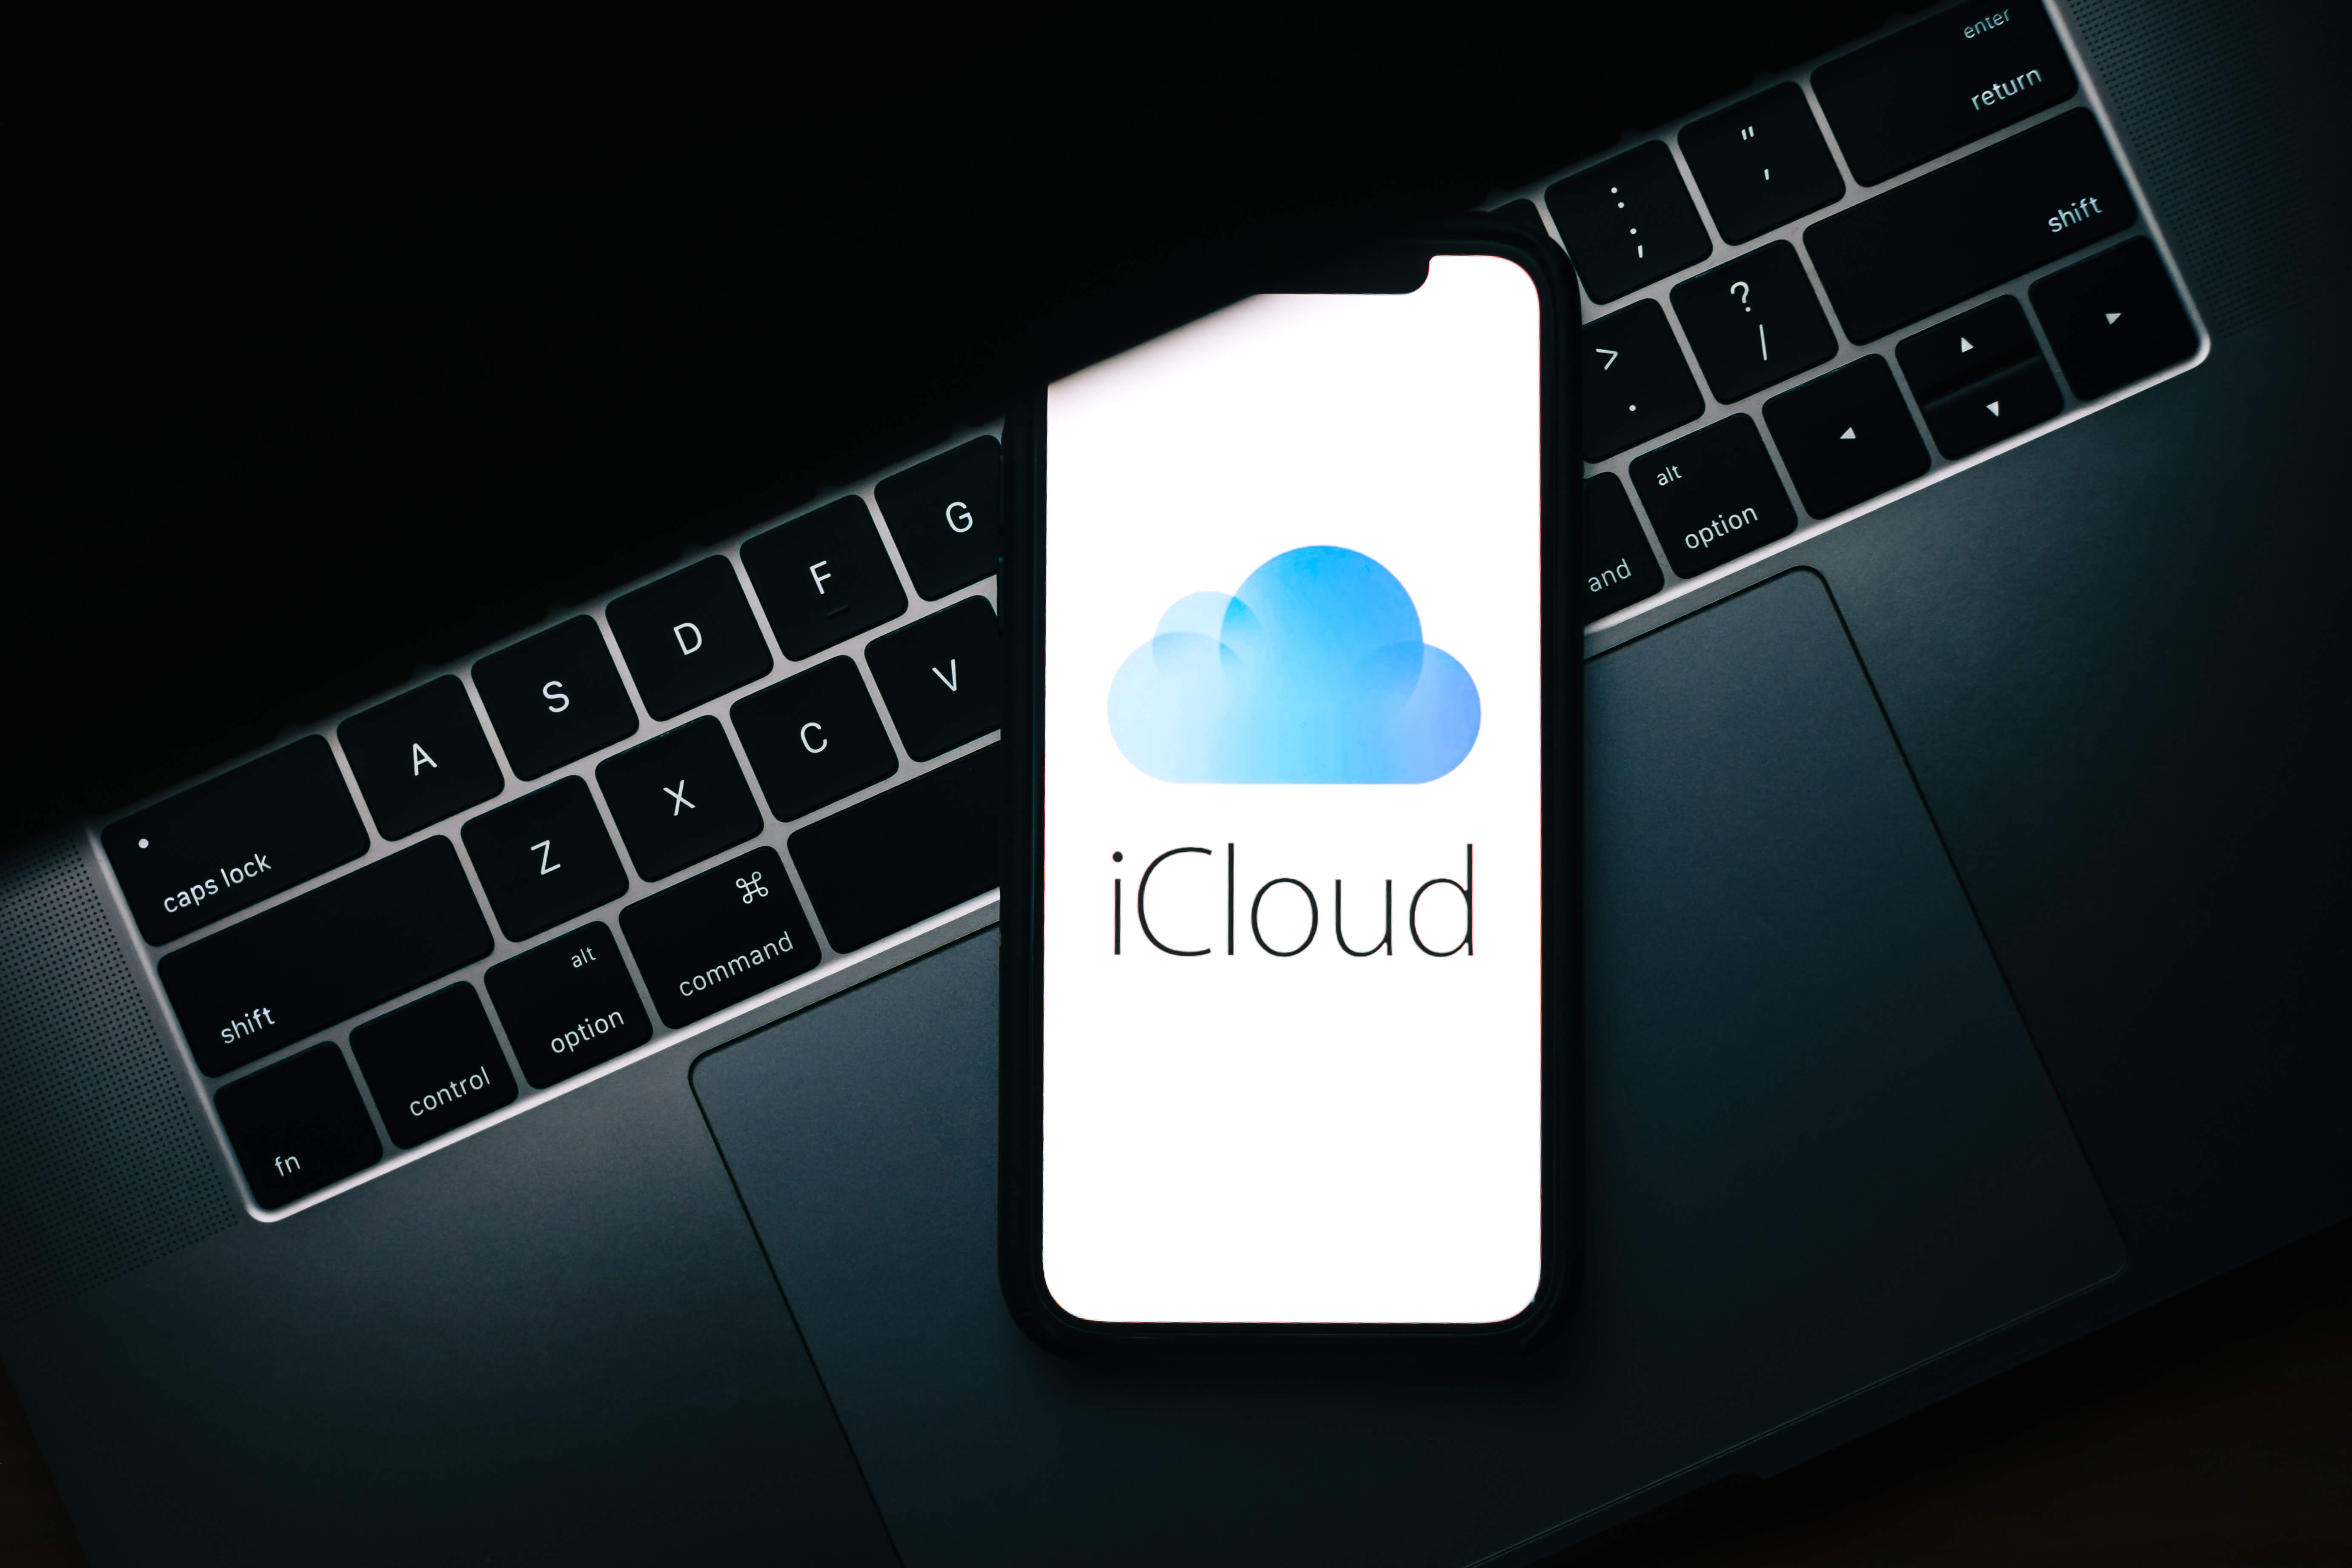 iCloud logo comparison with Xecret.io for cryptocurrency seed phrase storage